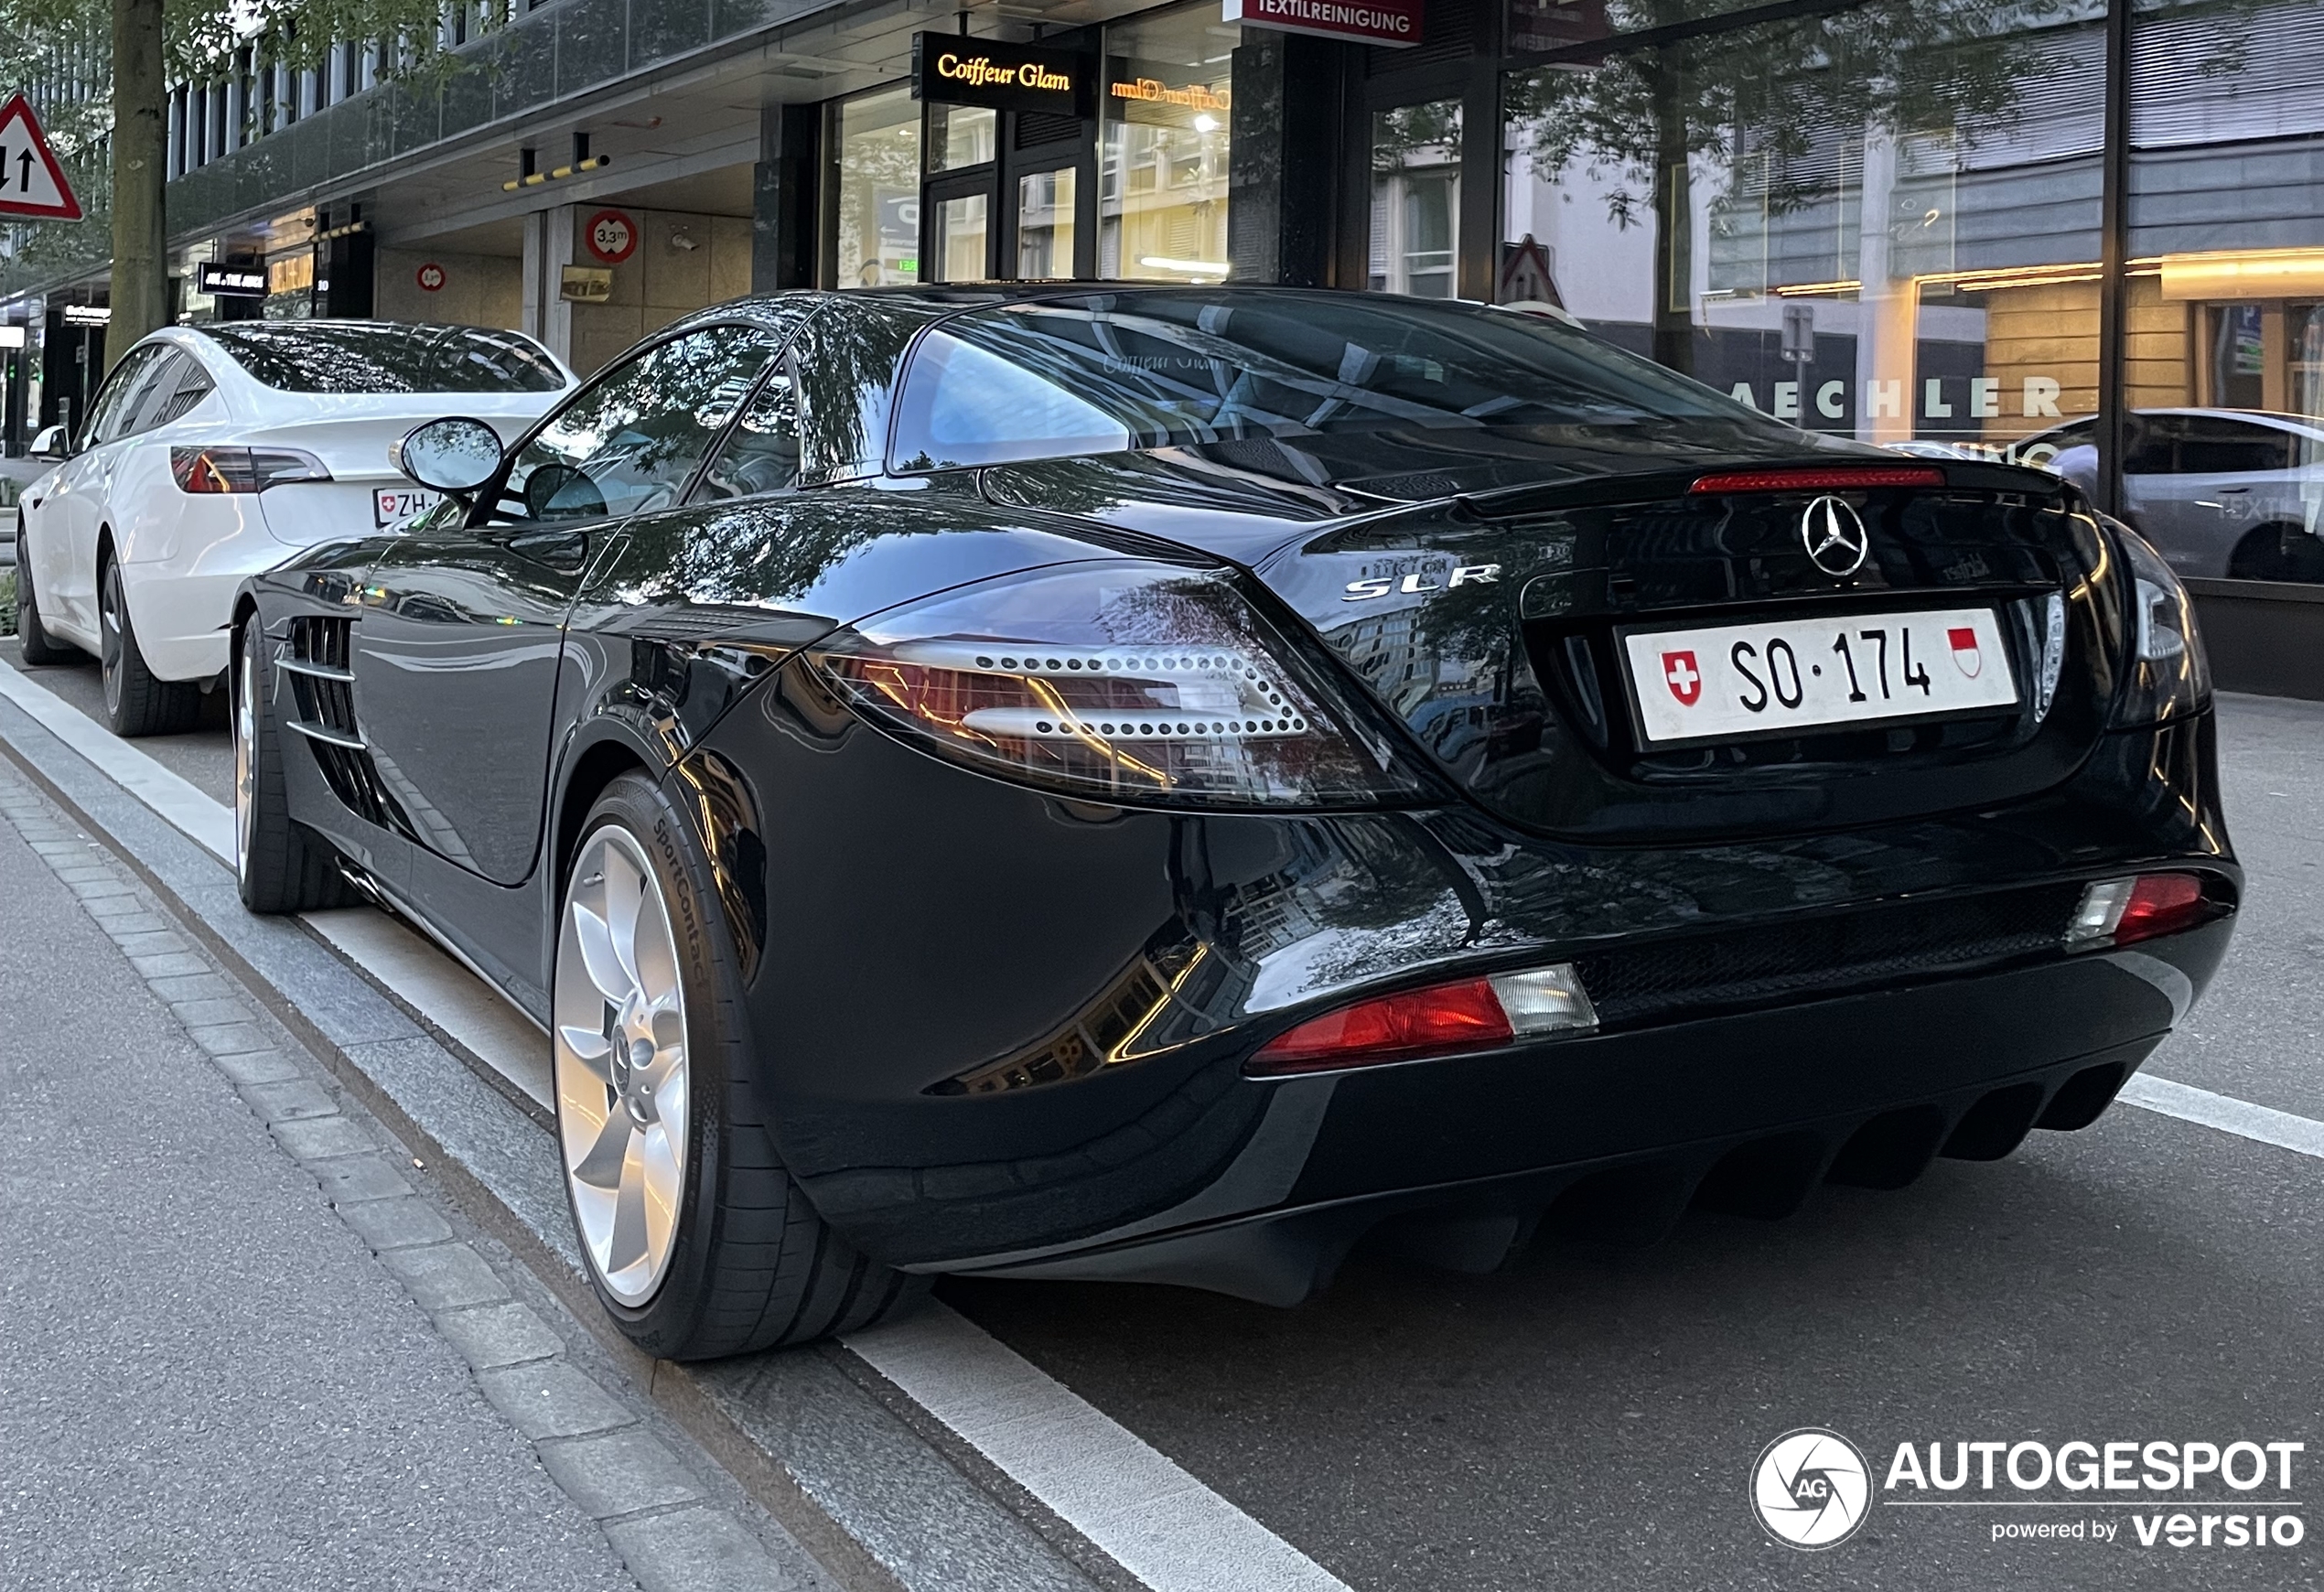 A beautiful SLR shows up in Zürich